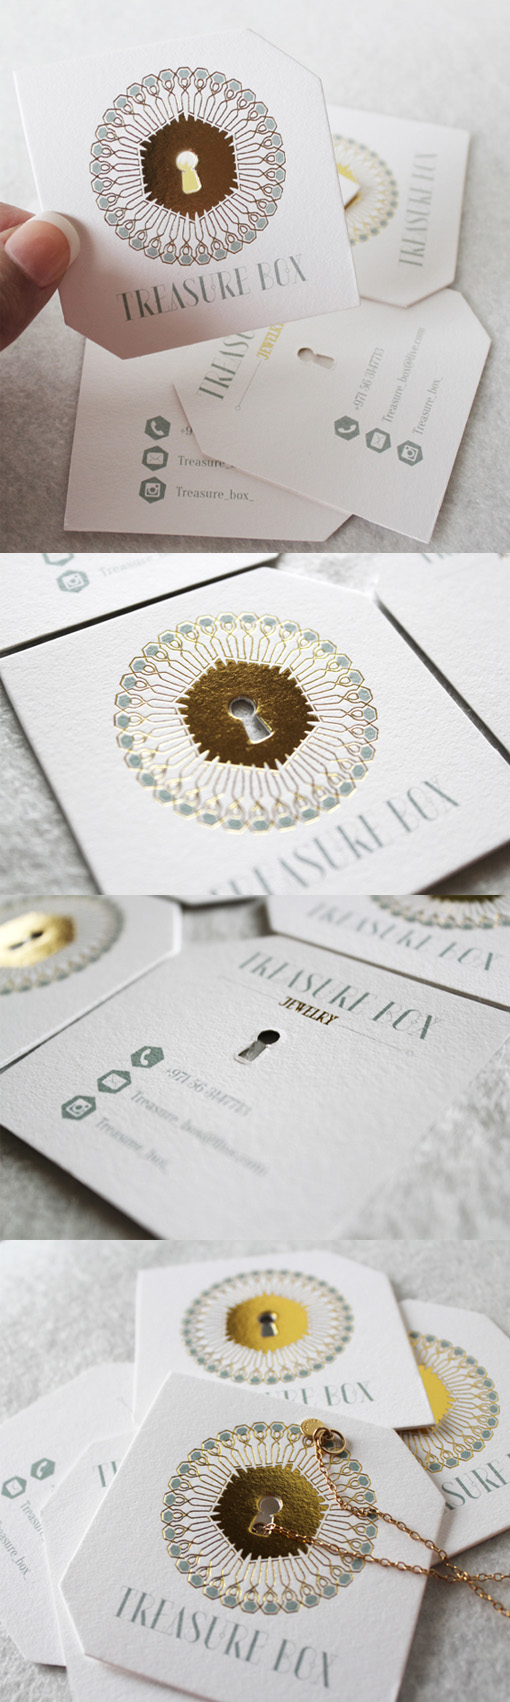 Elegant Die Cut And Gold Foil Embossed Business Card For A Jewelry Store